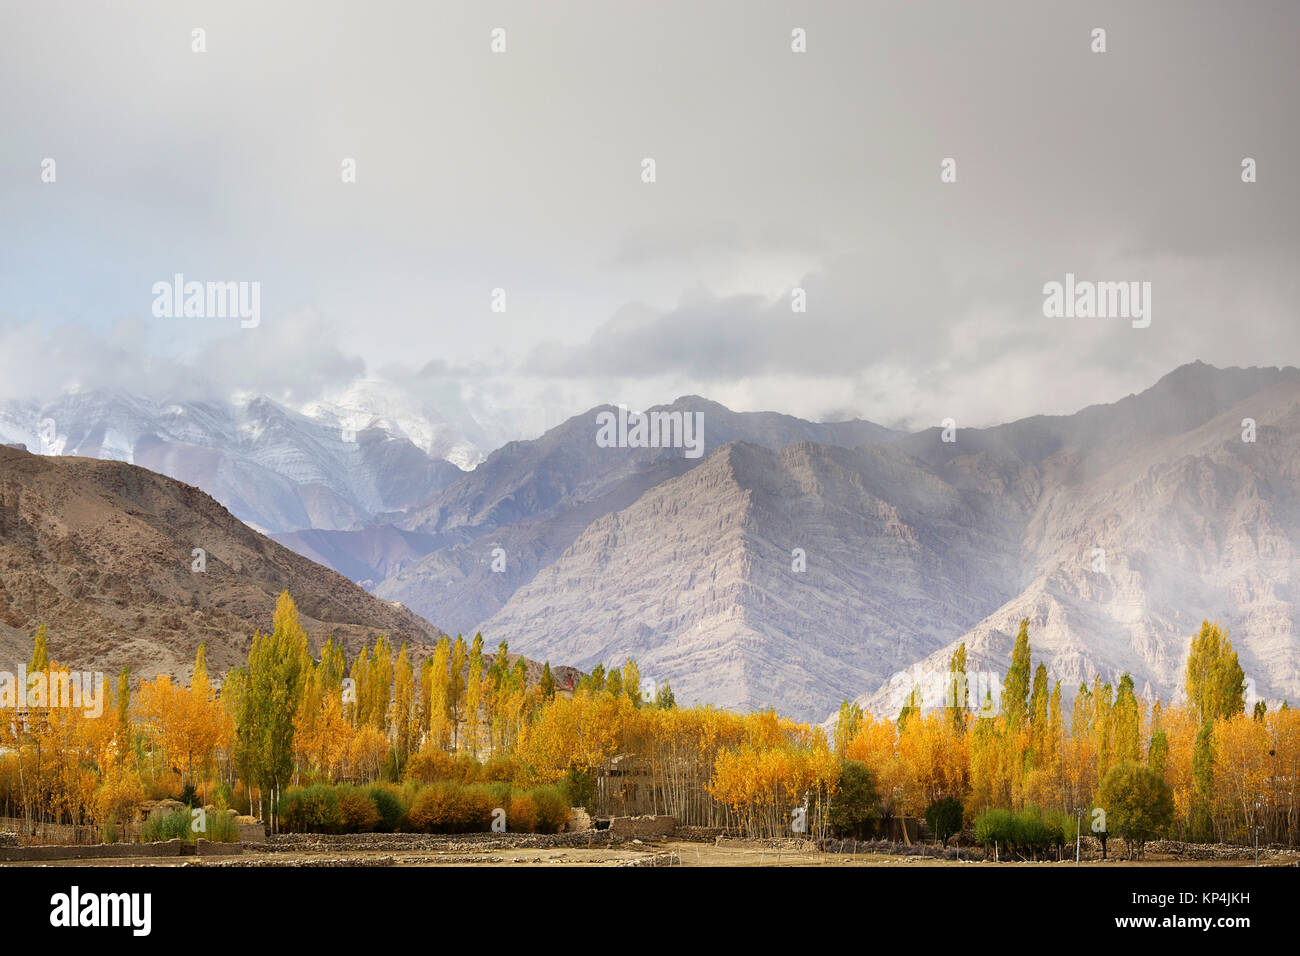 Ladakhi countryside in autumn, with trees in fall colours and himalayan mountains in the backdrop, Ladakh, Jammu and Kashmir, India. Stock Photo